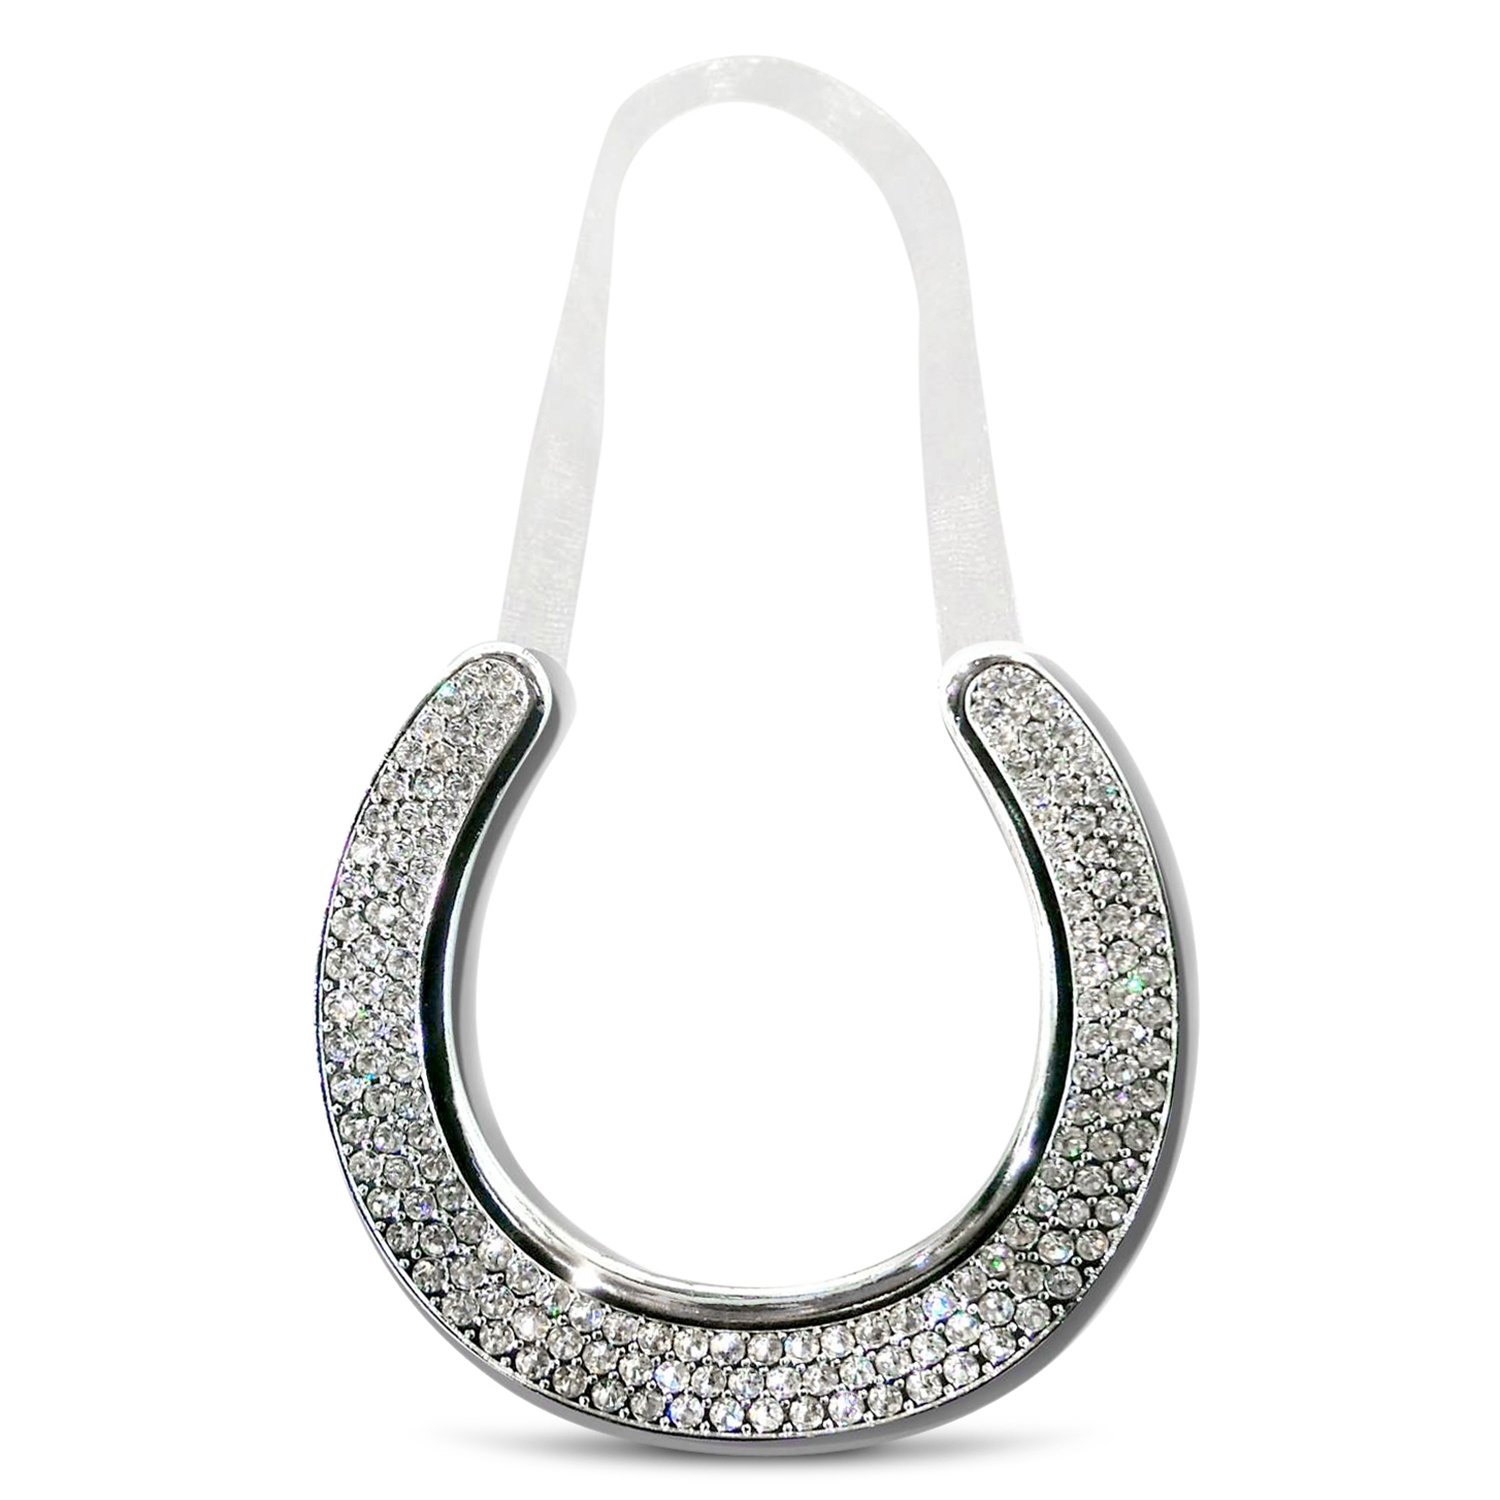 Horse hoof hanger w/clear crystals